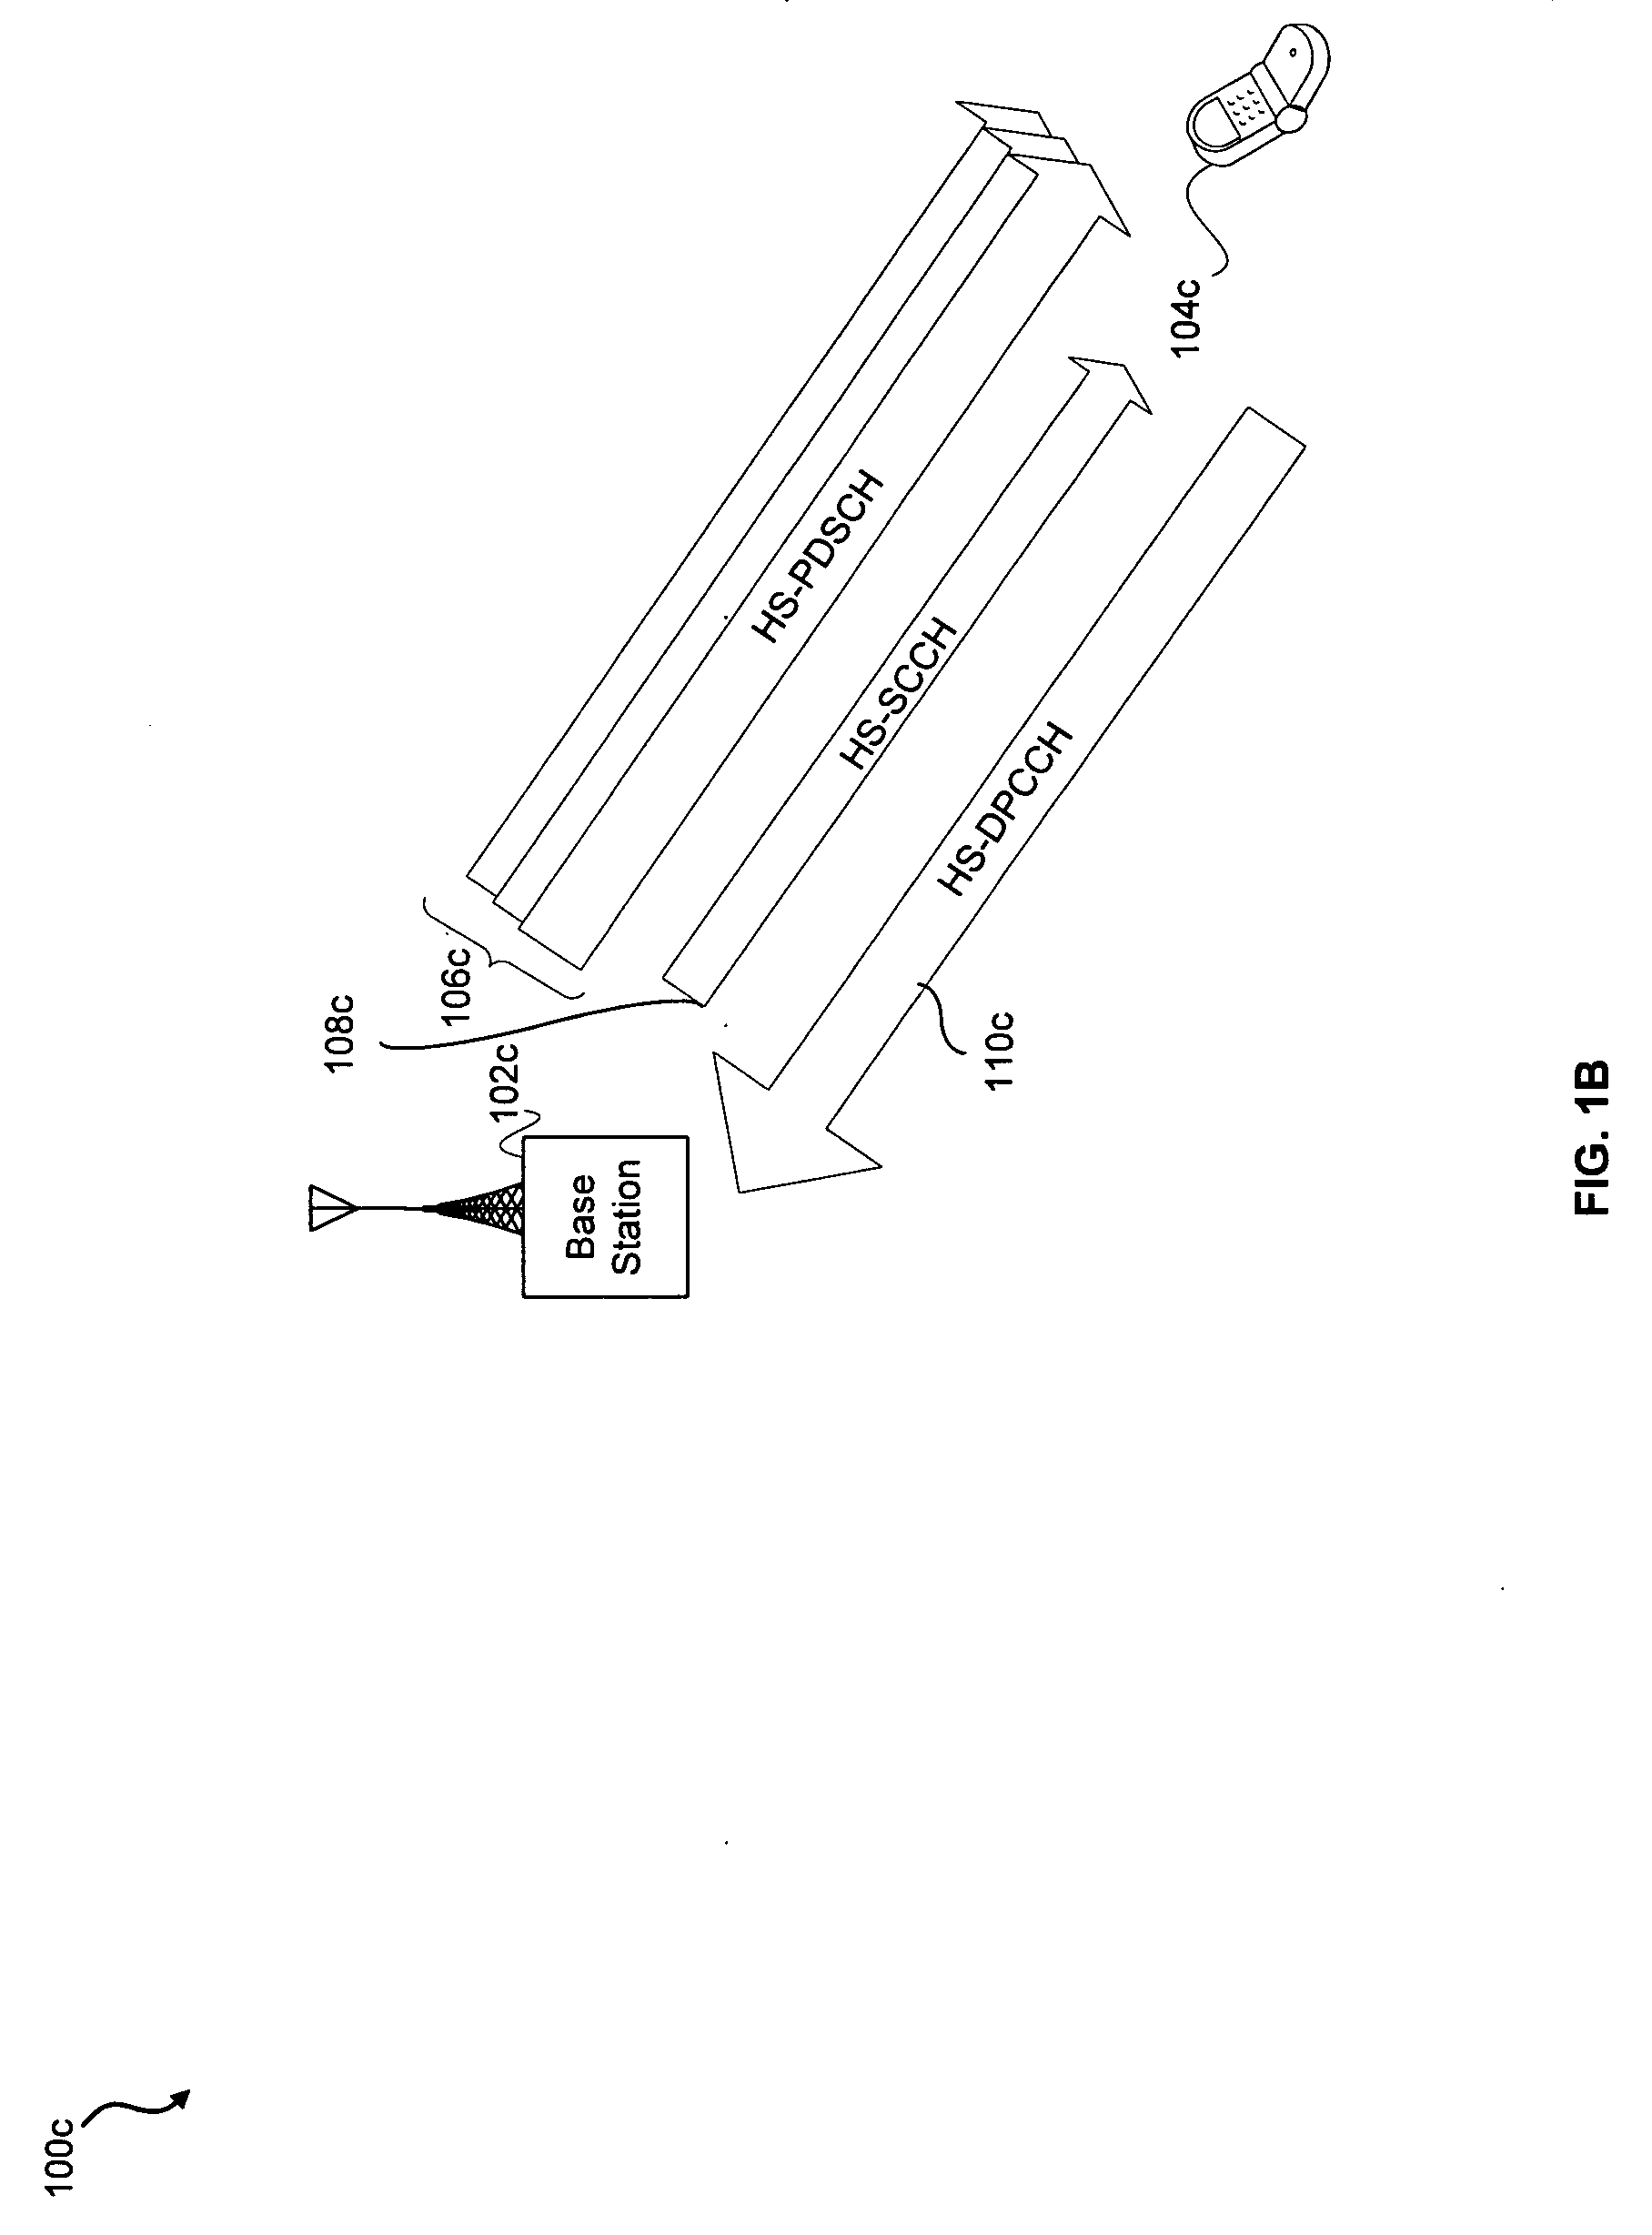 Method and apparatus to improve closed loop transmit diversity modes performance via interference suppression in a WCDMA network equipped with a rake receiver